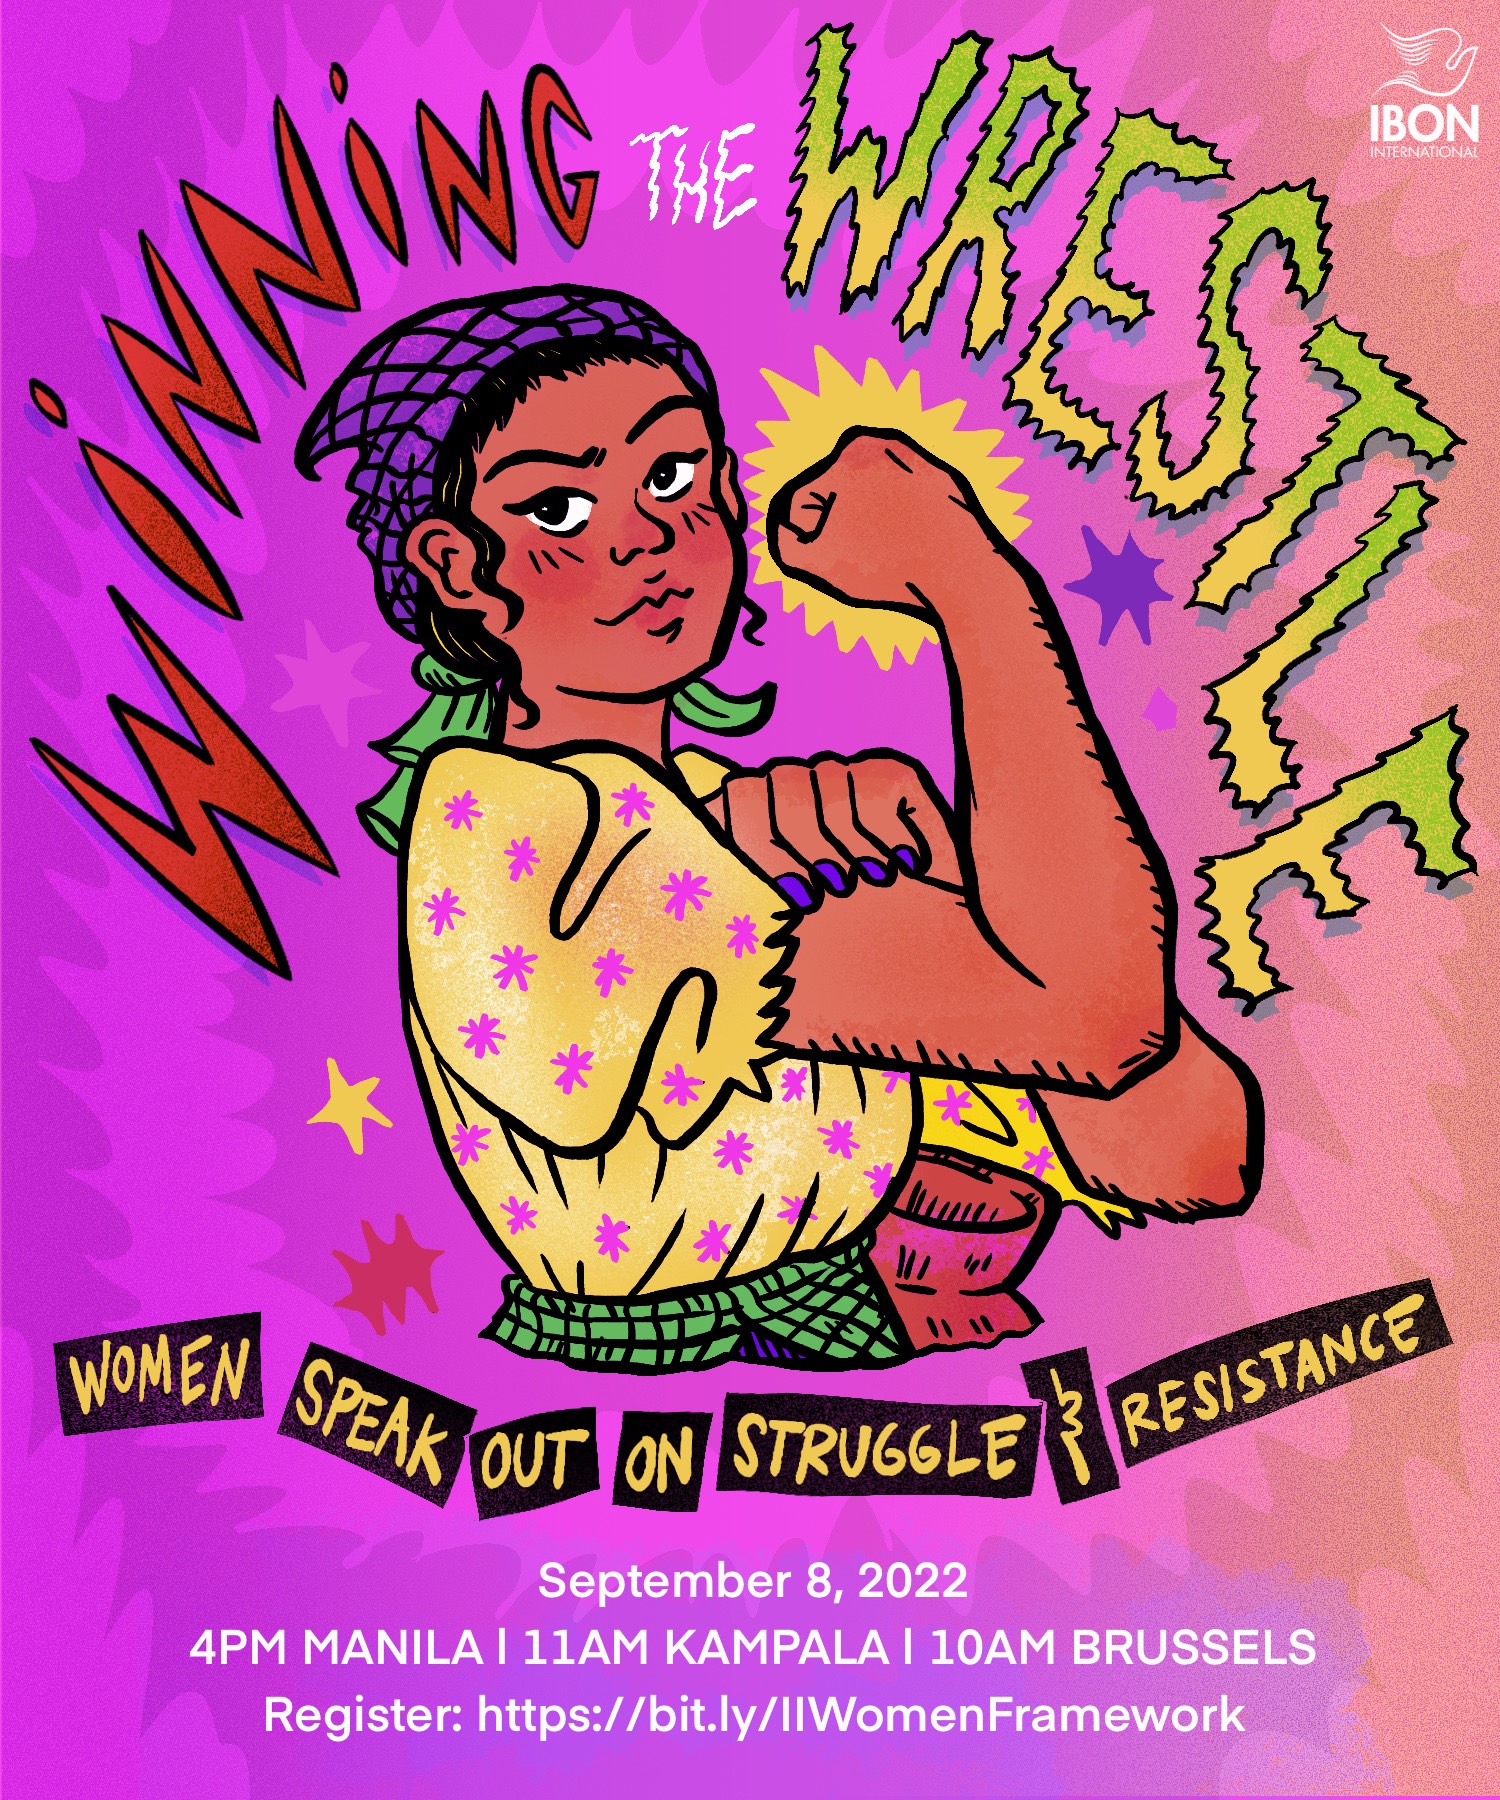 [EVENT] Winning the wrestle: Women speak out on struggle and resistance